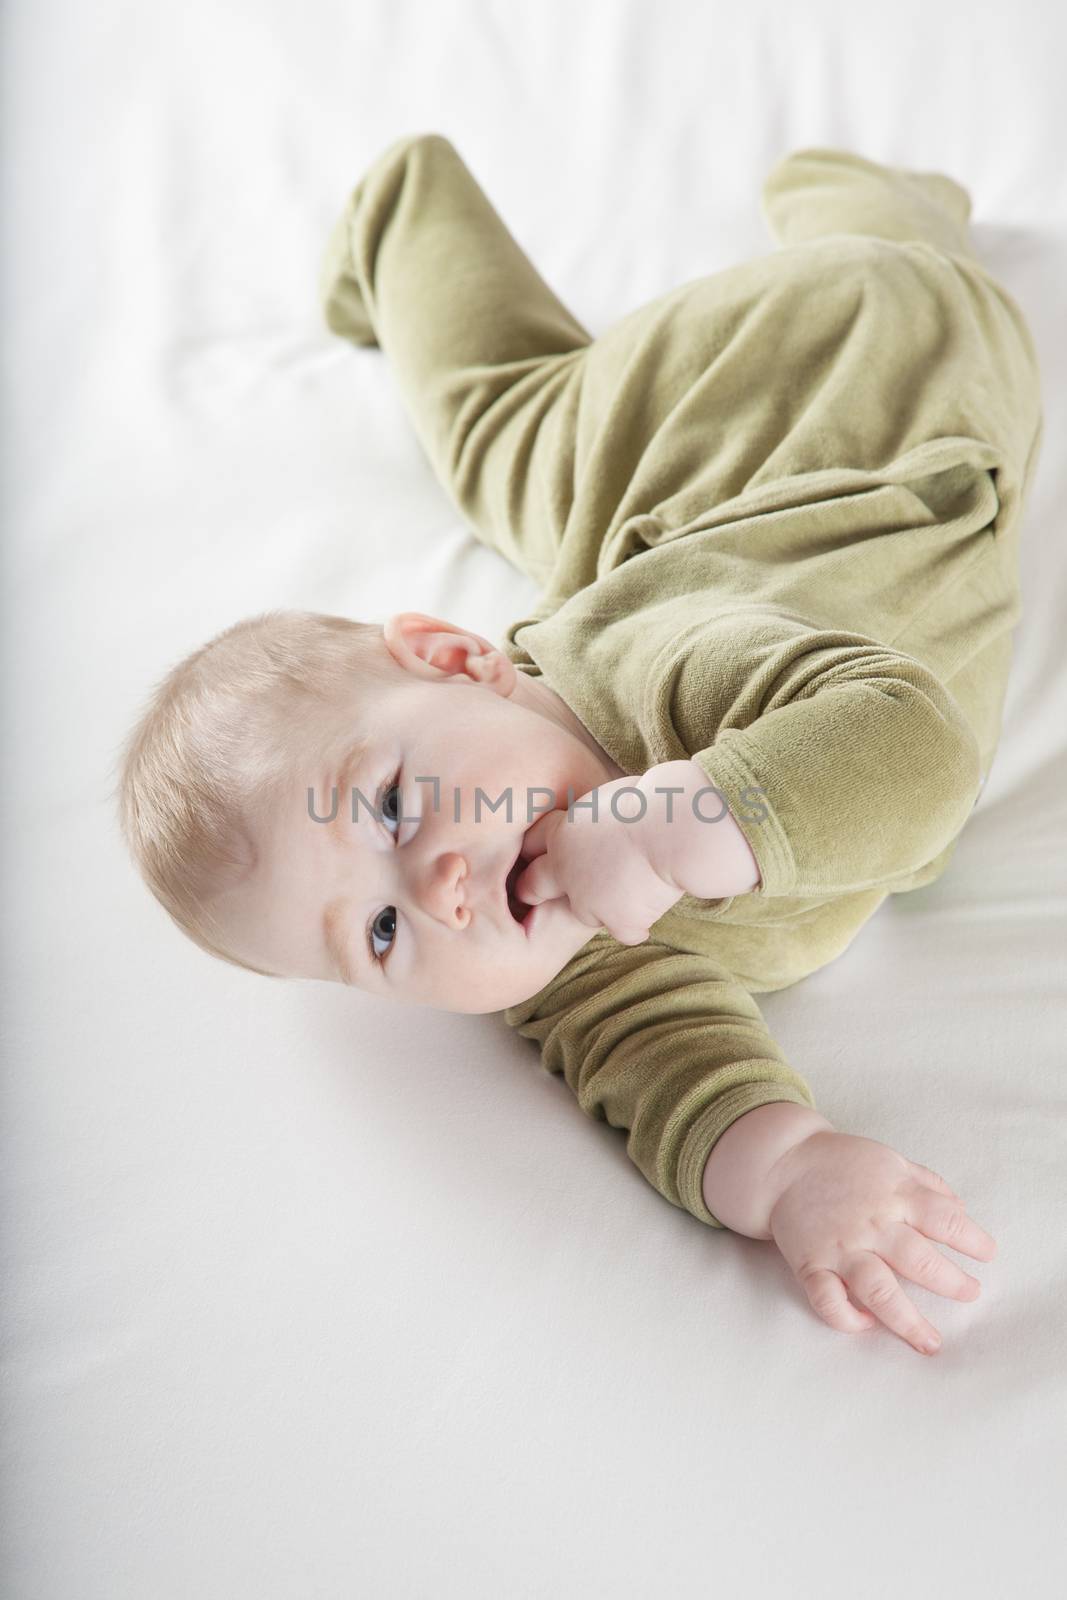 six months age blonde baby green velvet onesie lying on white sheet bed smiling happy face